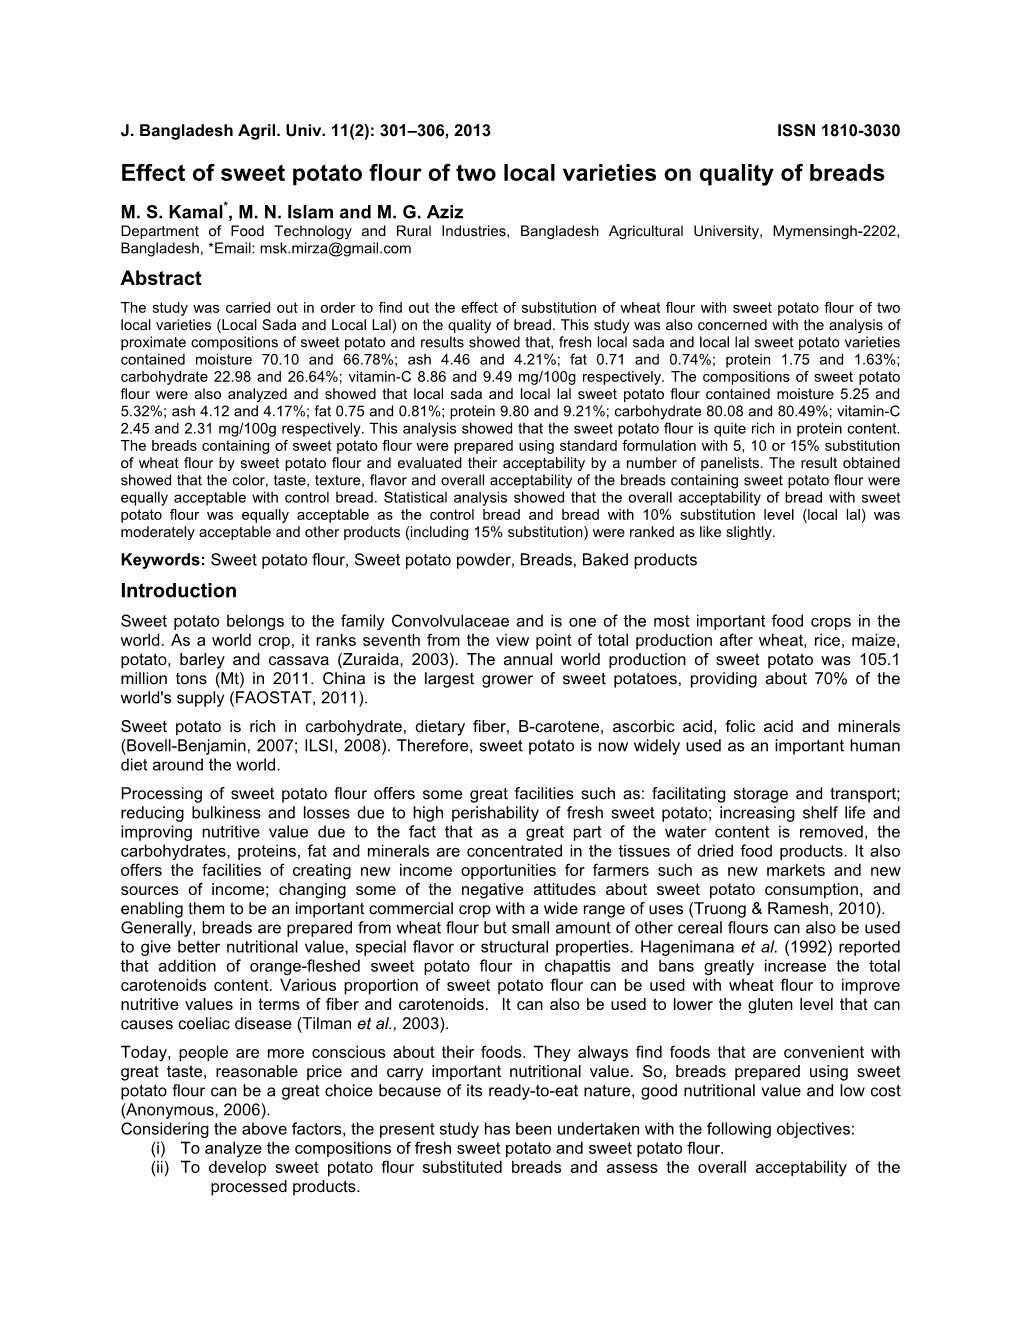 Effect of Sweet Potato Flour of Two Local Varieties on Quality of Breads